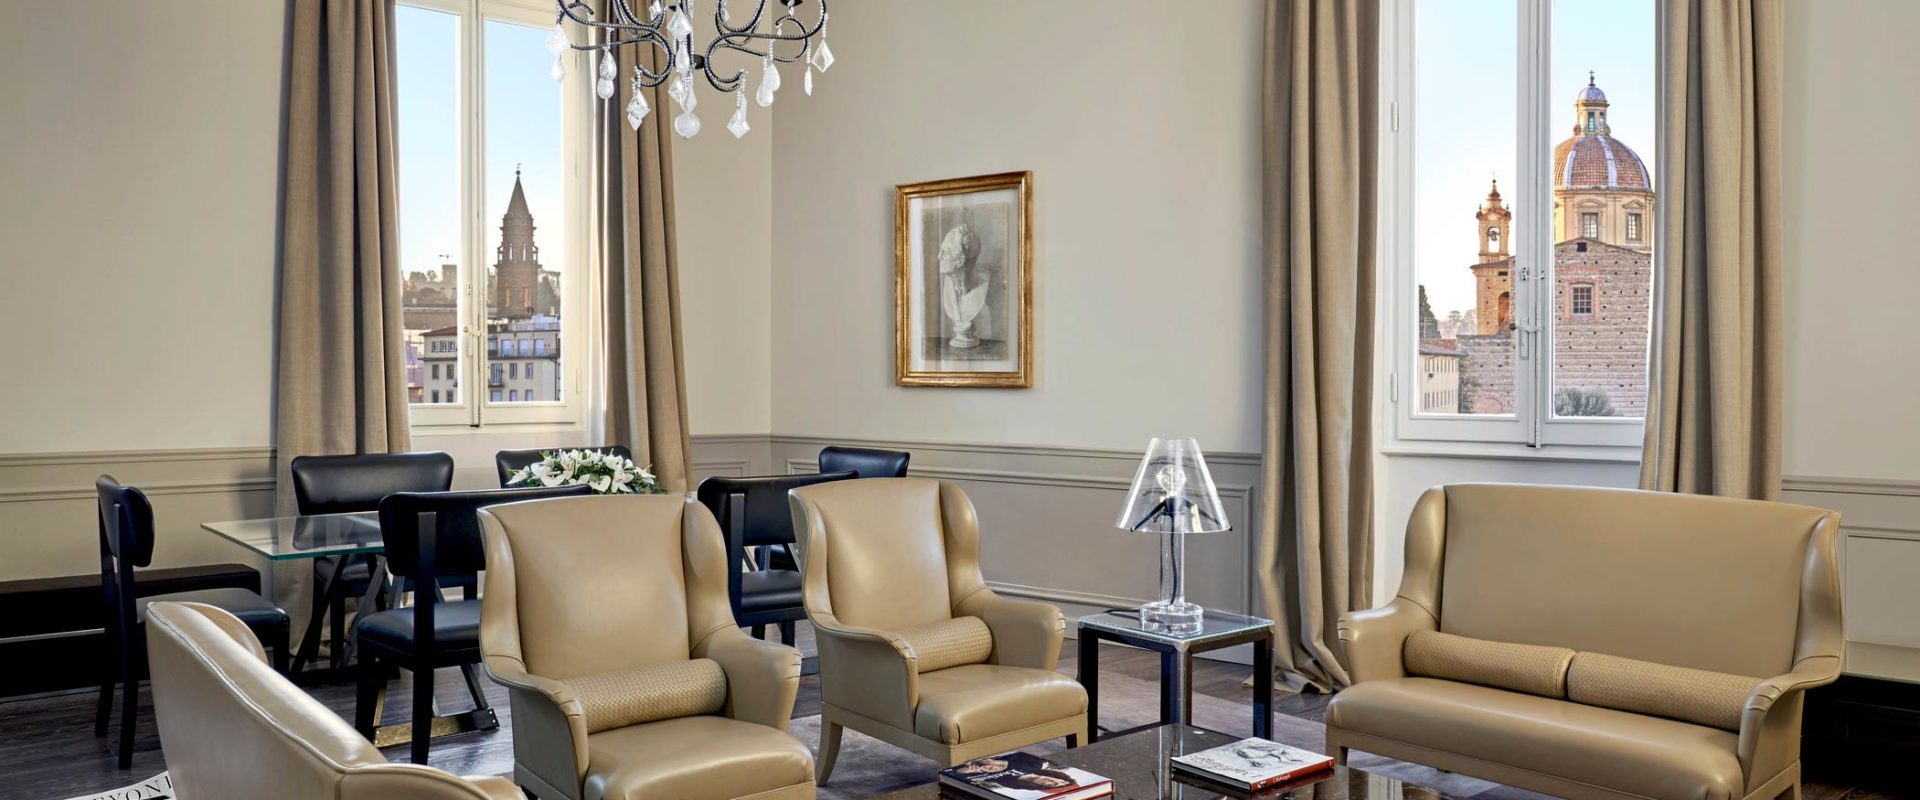 gray leather couch and armchairs in room